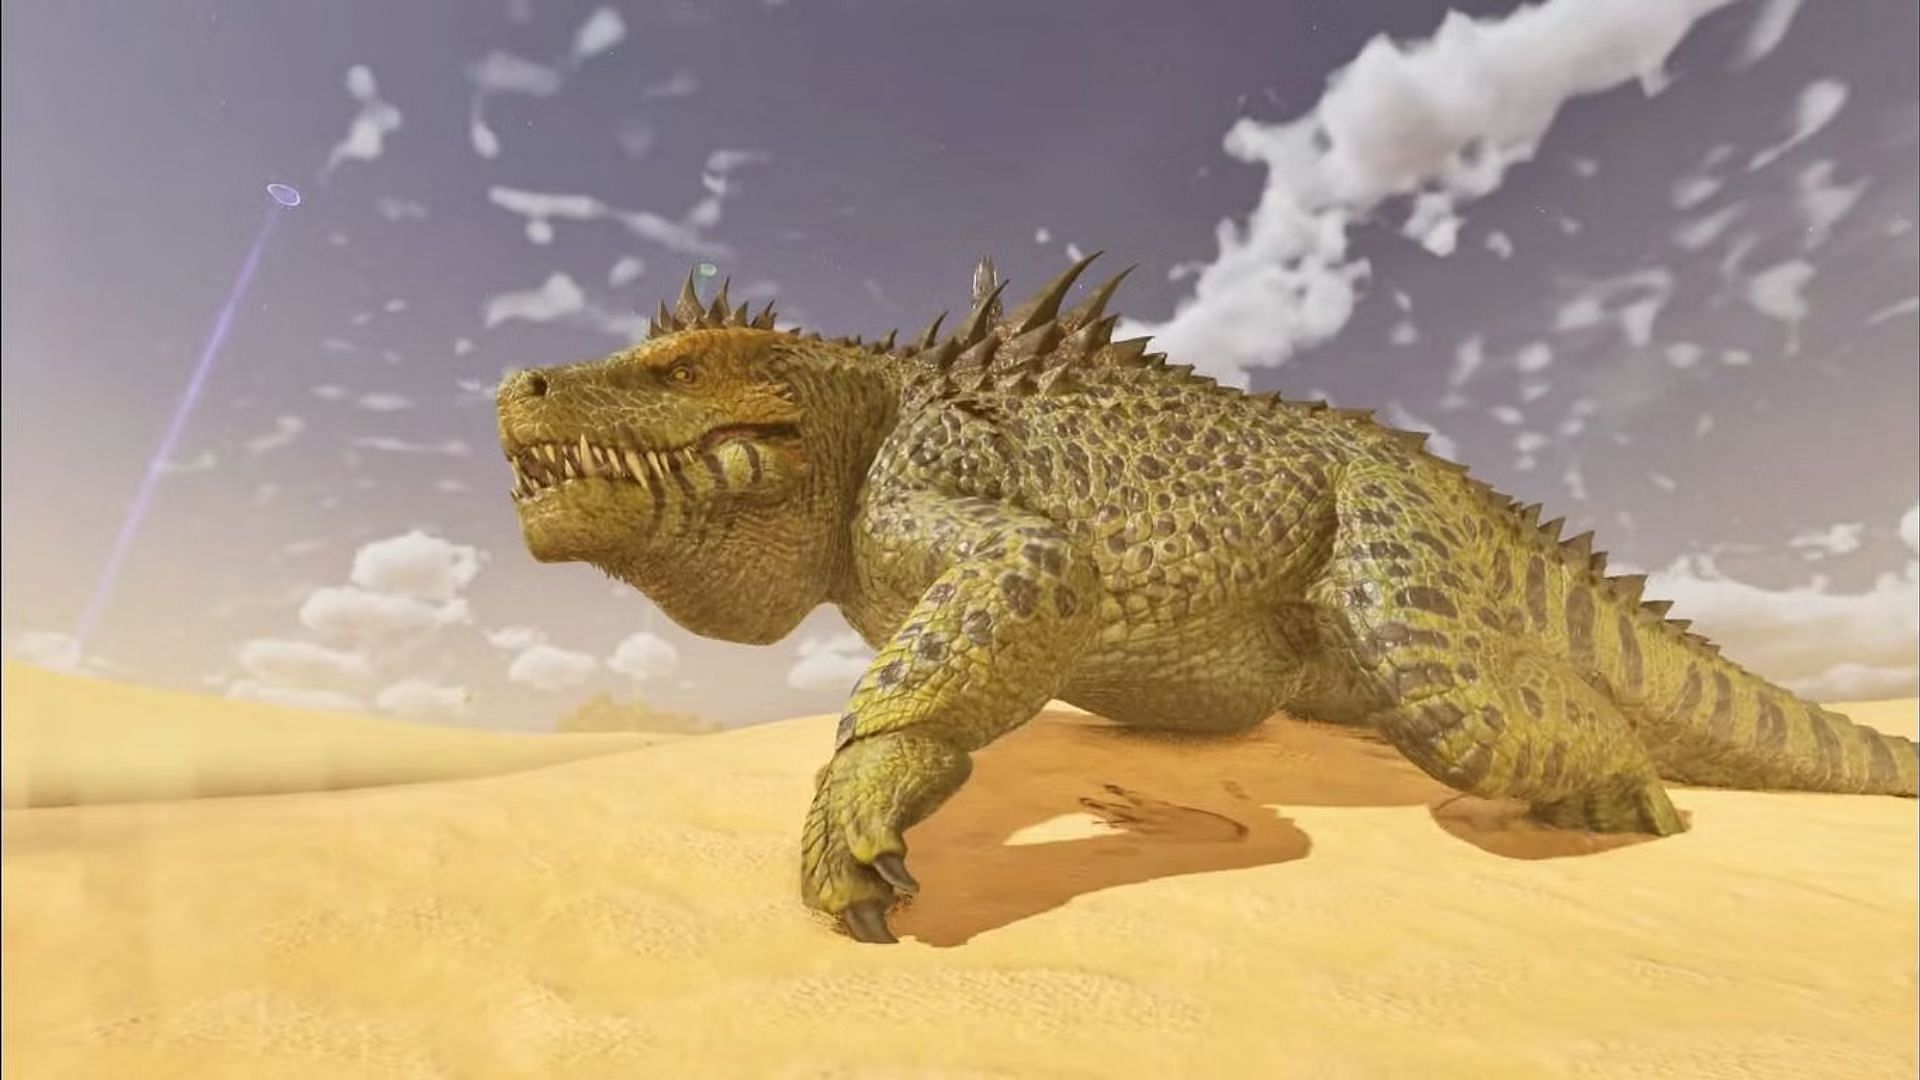 Fasolasuchus can travel at great speed in sand (Image via Studio Wildcard)